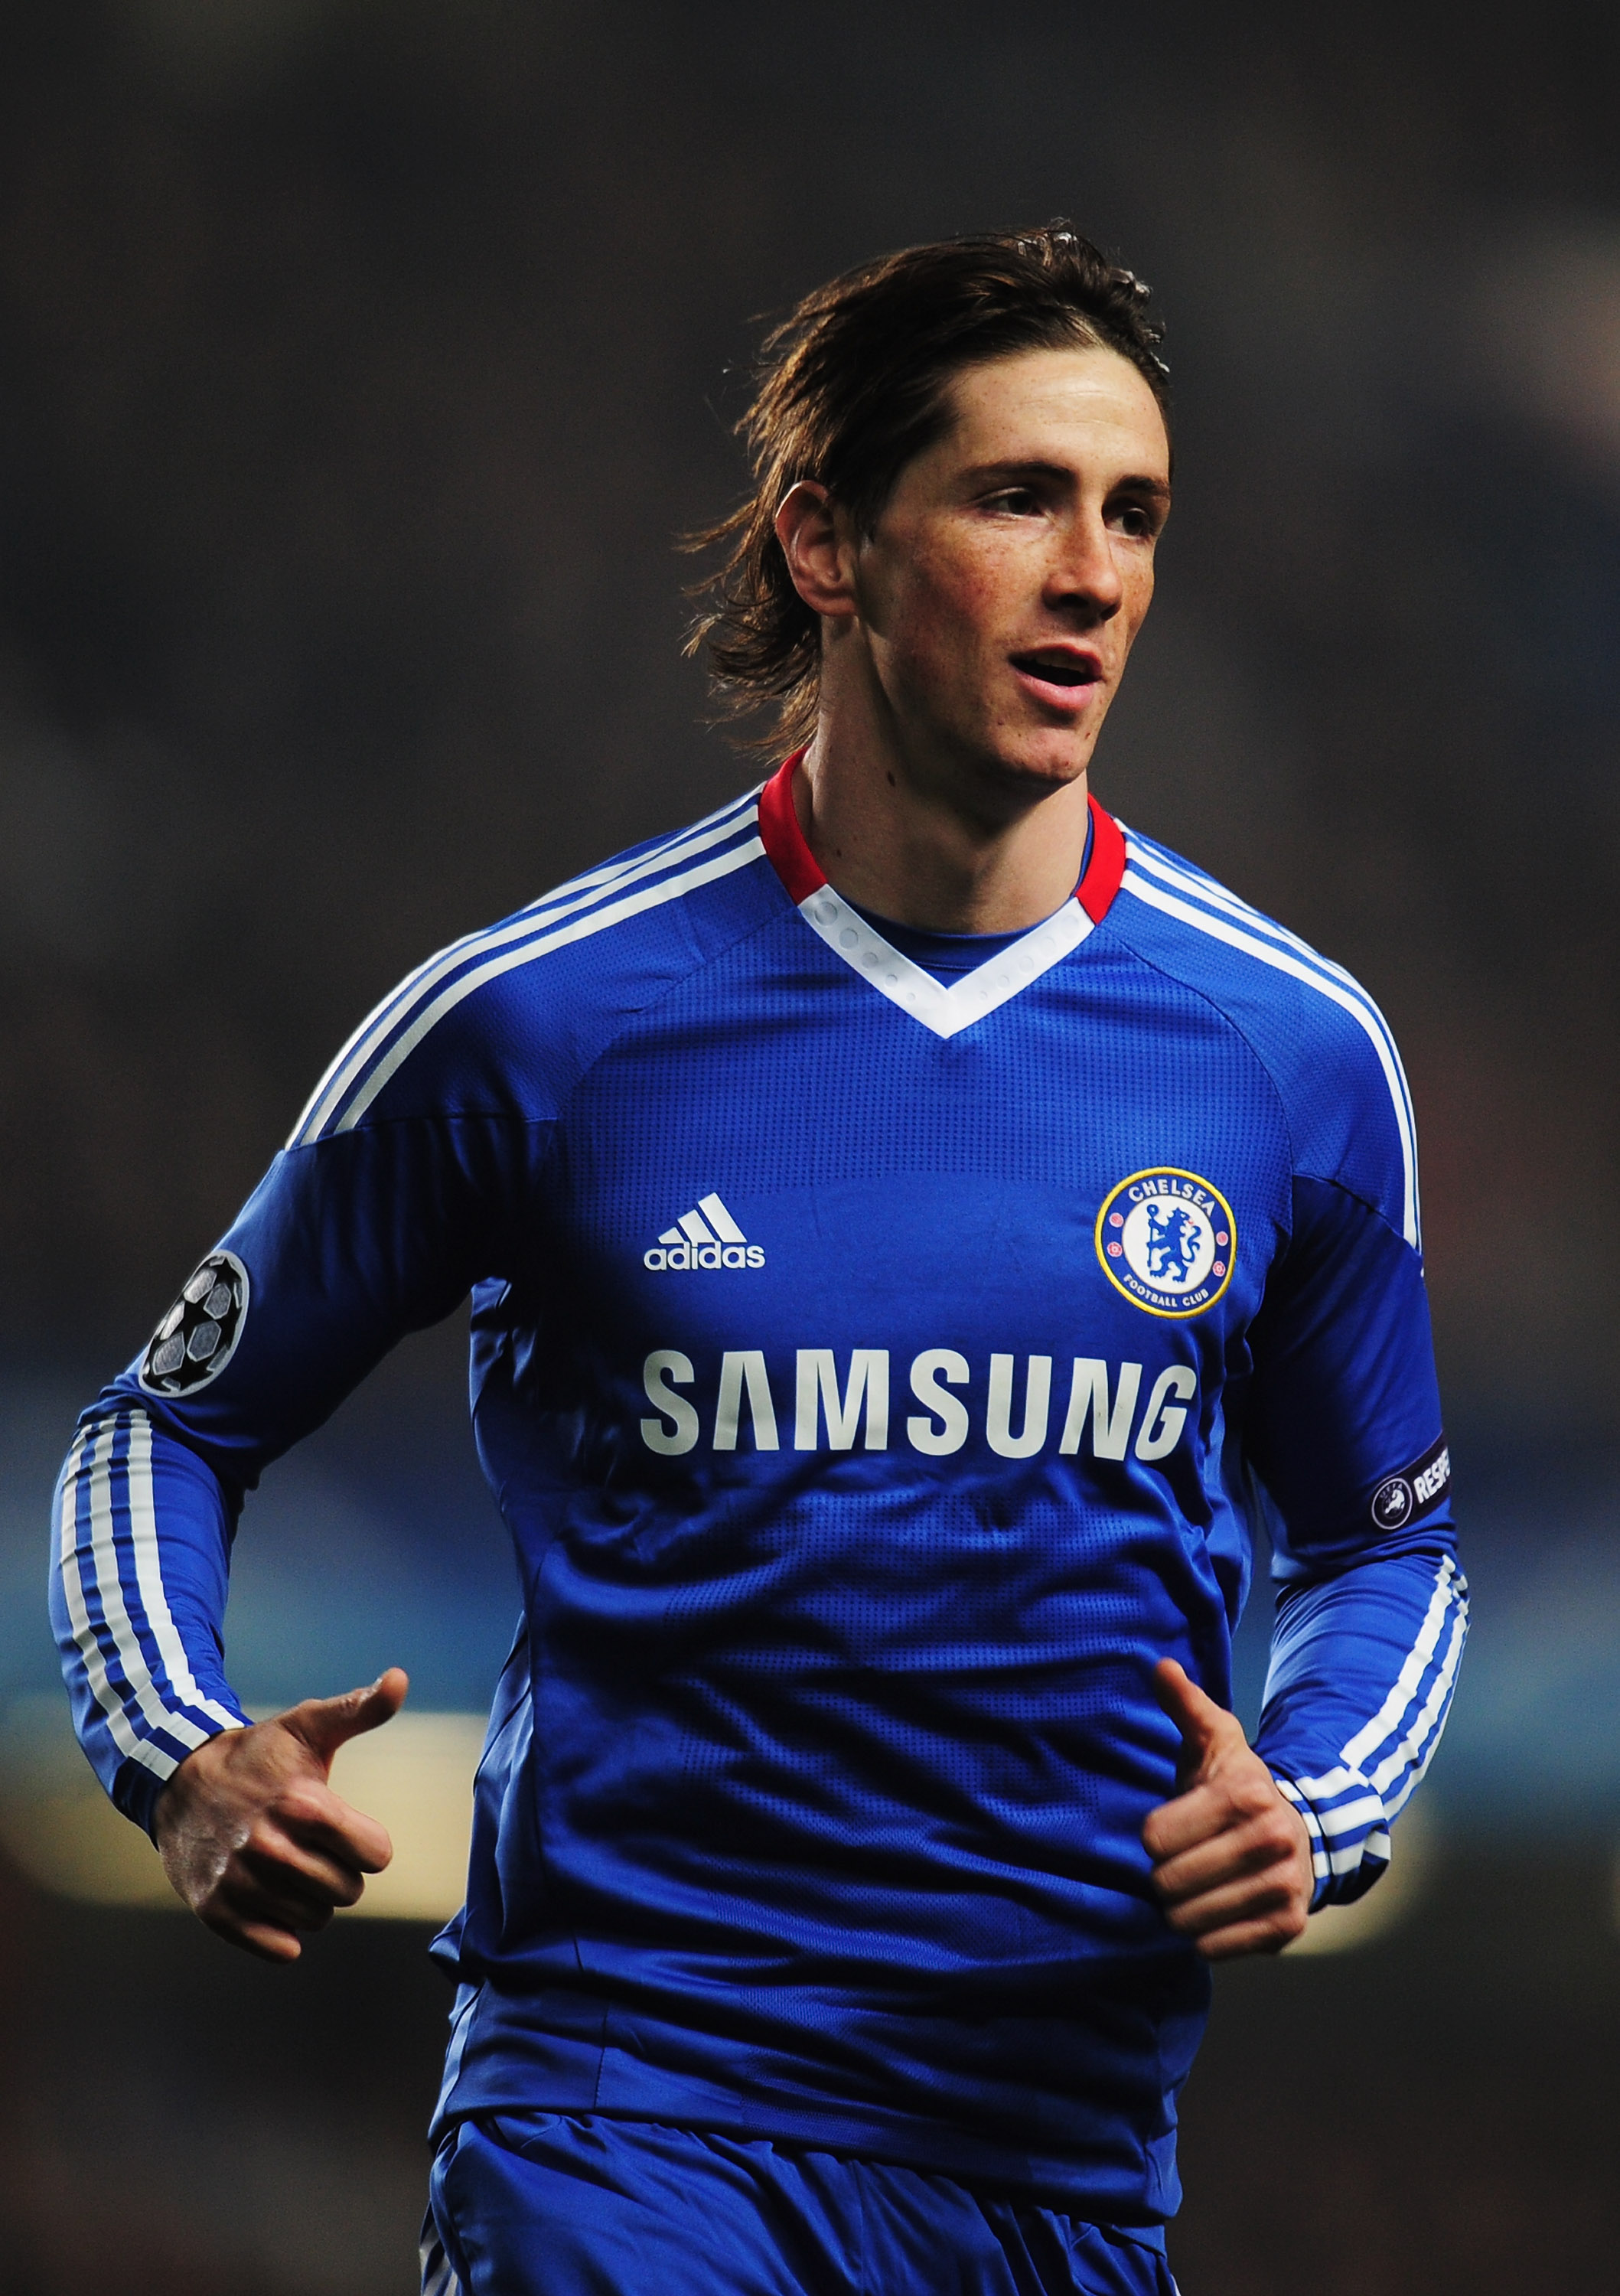 LONDON, UNITED KINGDOM - MARCH 16:  Fernando Torres of Chelsea in action during the UEFA Champions League round of sixteen second leg match between Chelsea and FC Copenhagen at Stamford Bridge on March 16, 2011 in London, England.  (Photo by Shaun Botteri